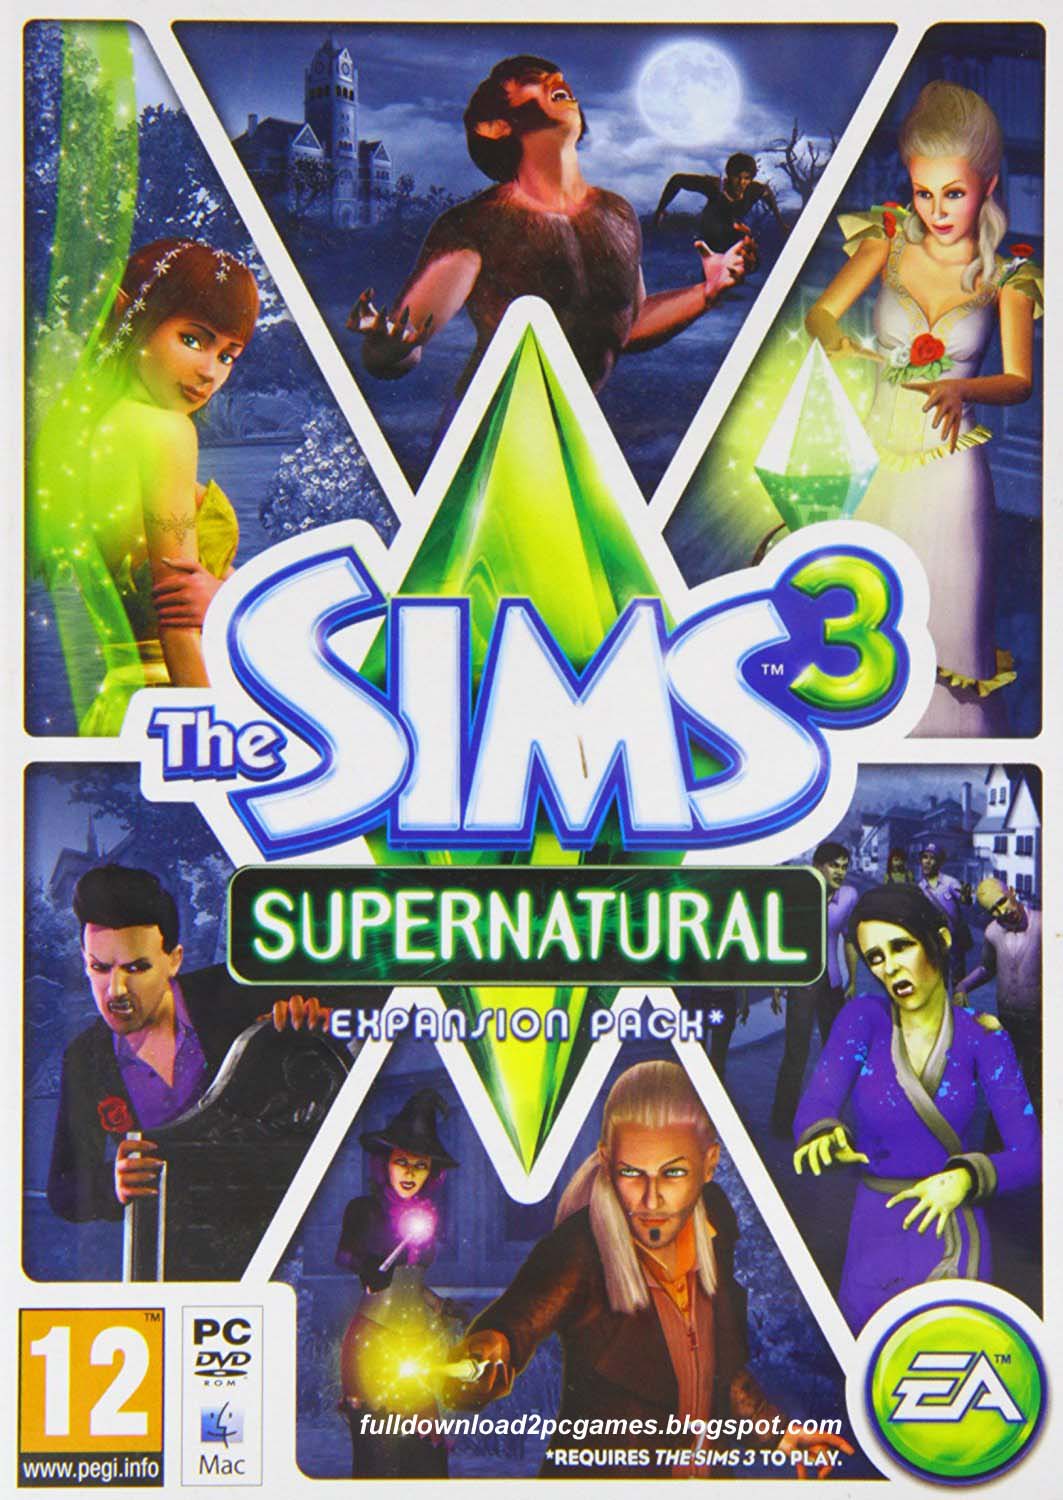 Full Version Games Free Download For Pc The Sims 3 Supernatural